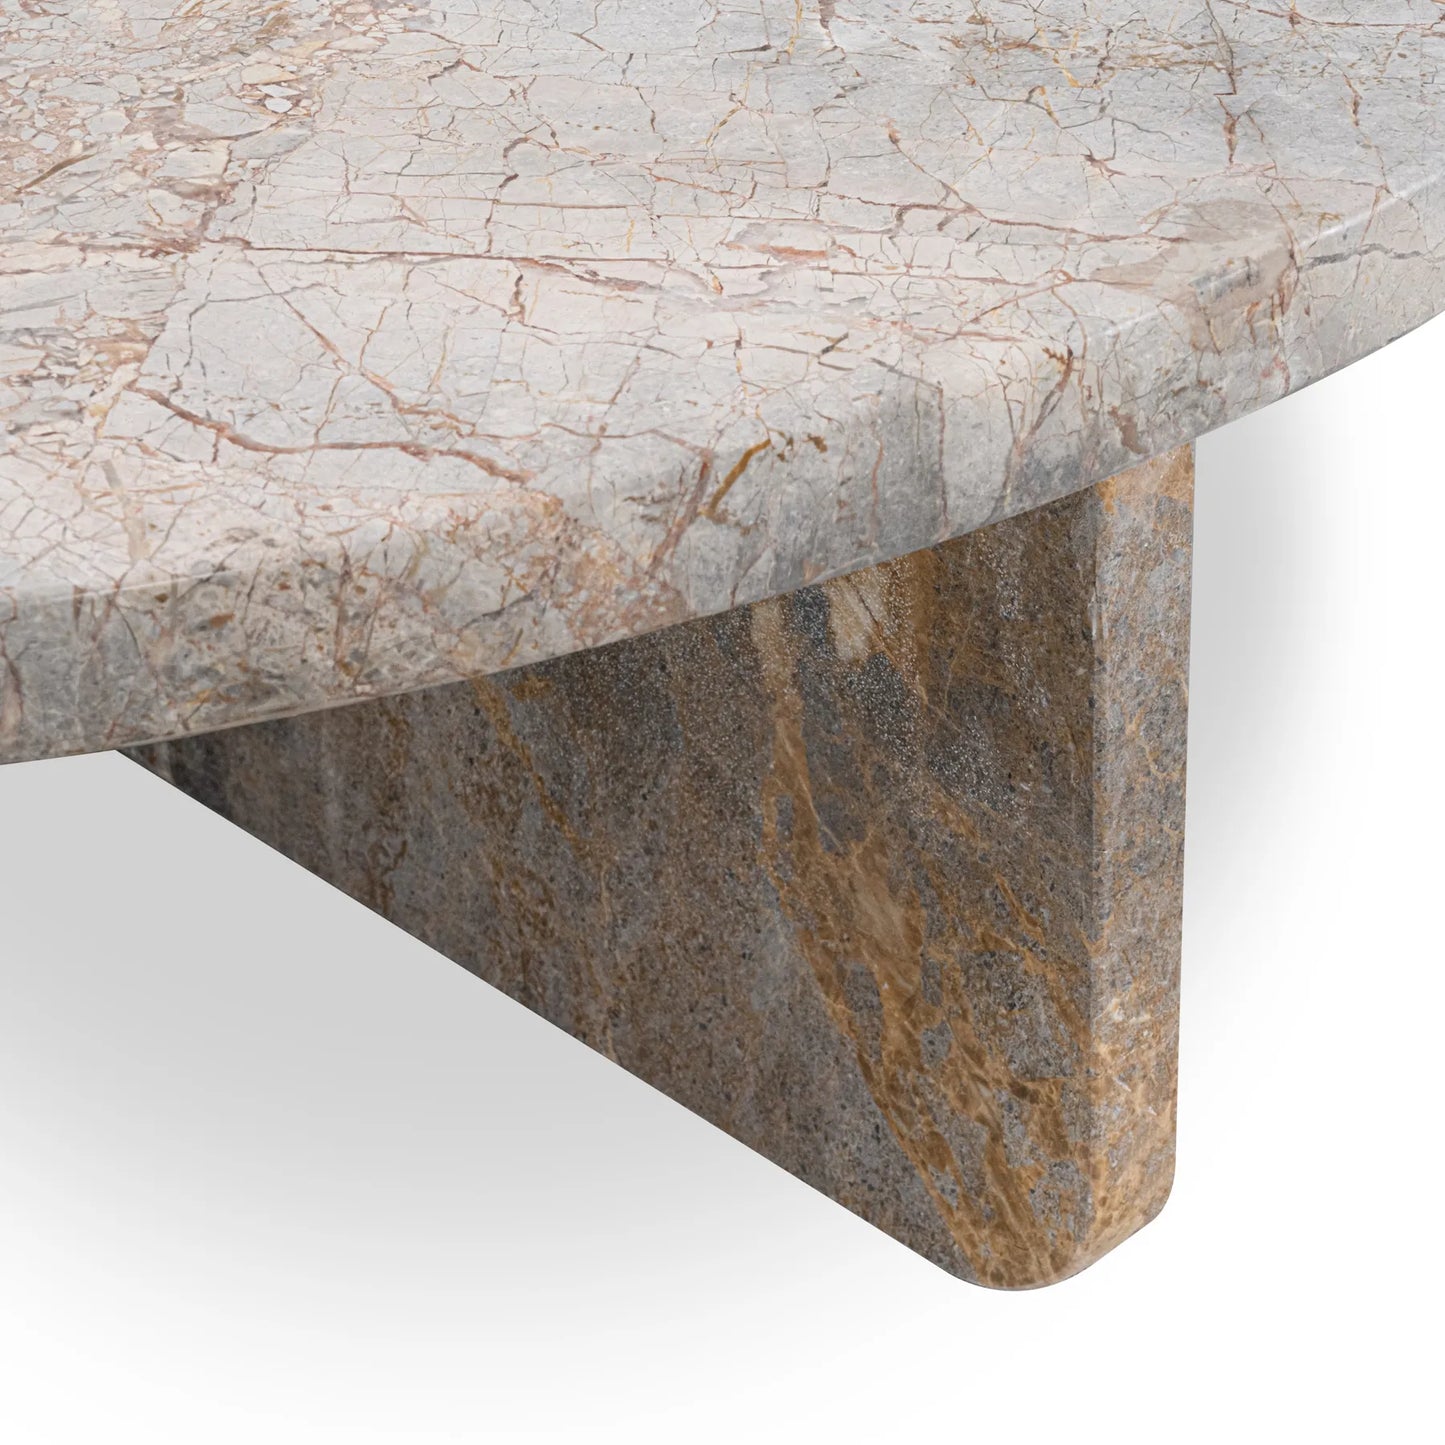 Artie Coffee Table - Earth Marble